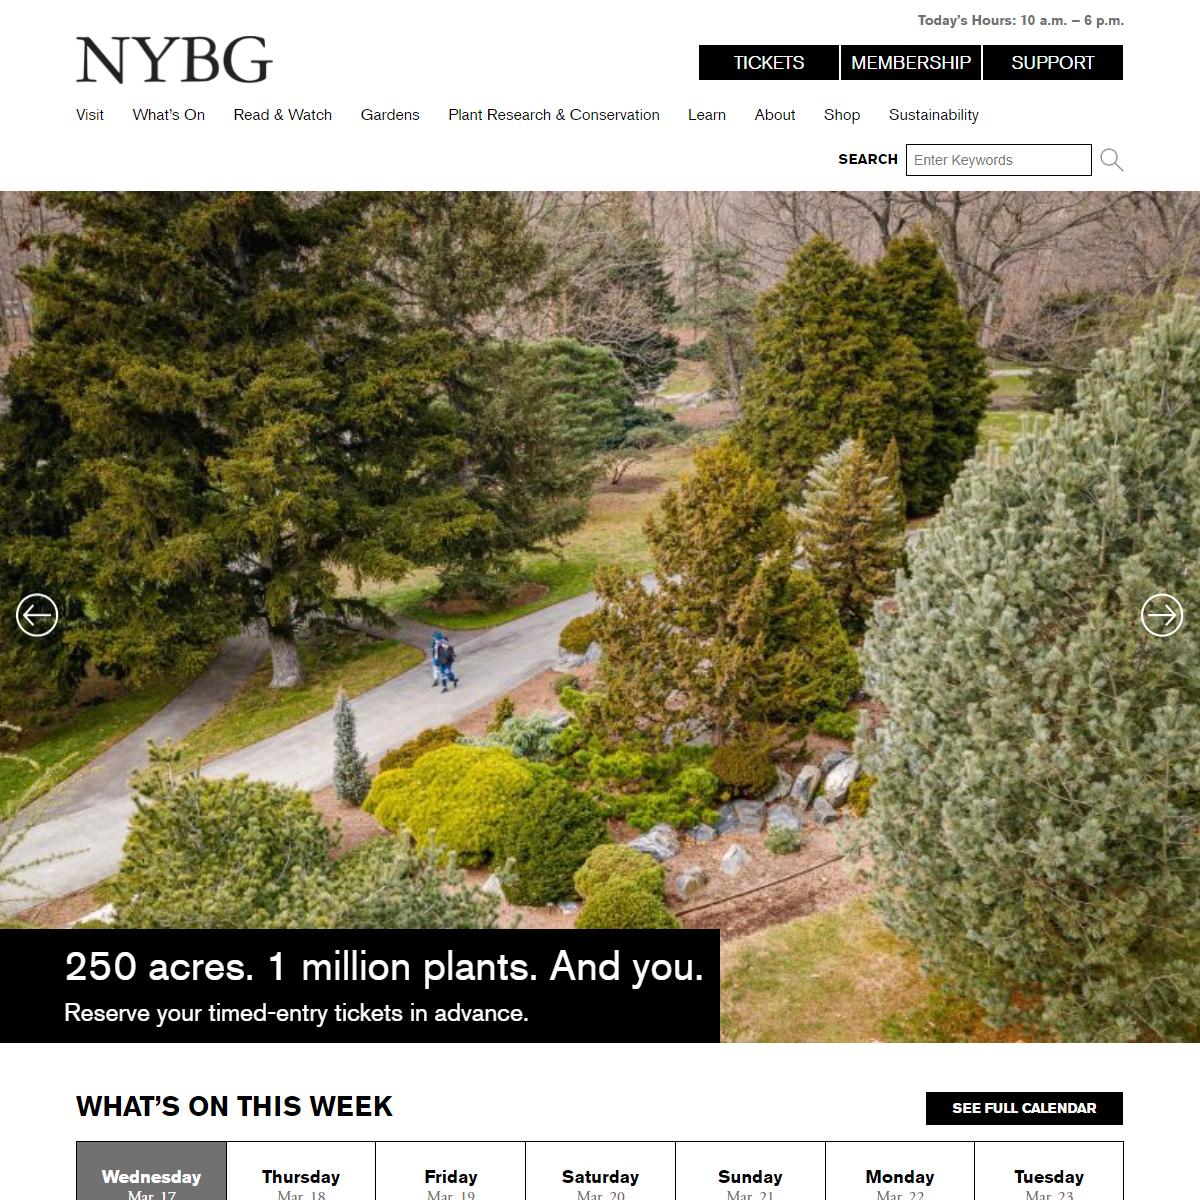 A complete backup of https://www.nybg.org/